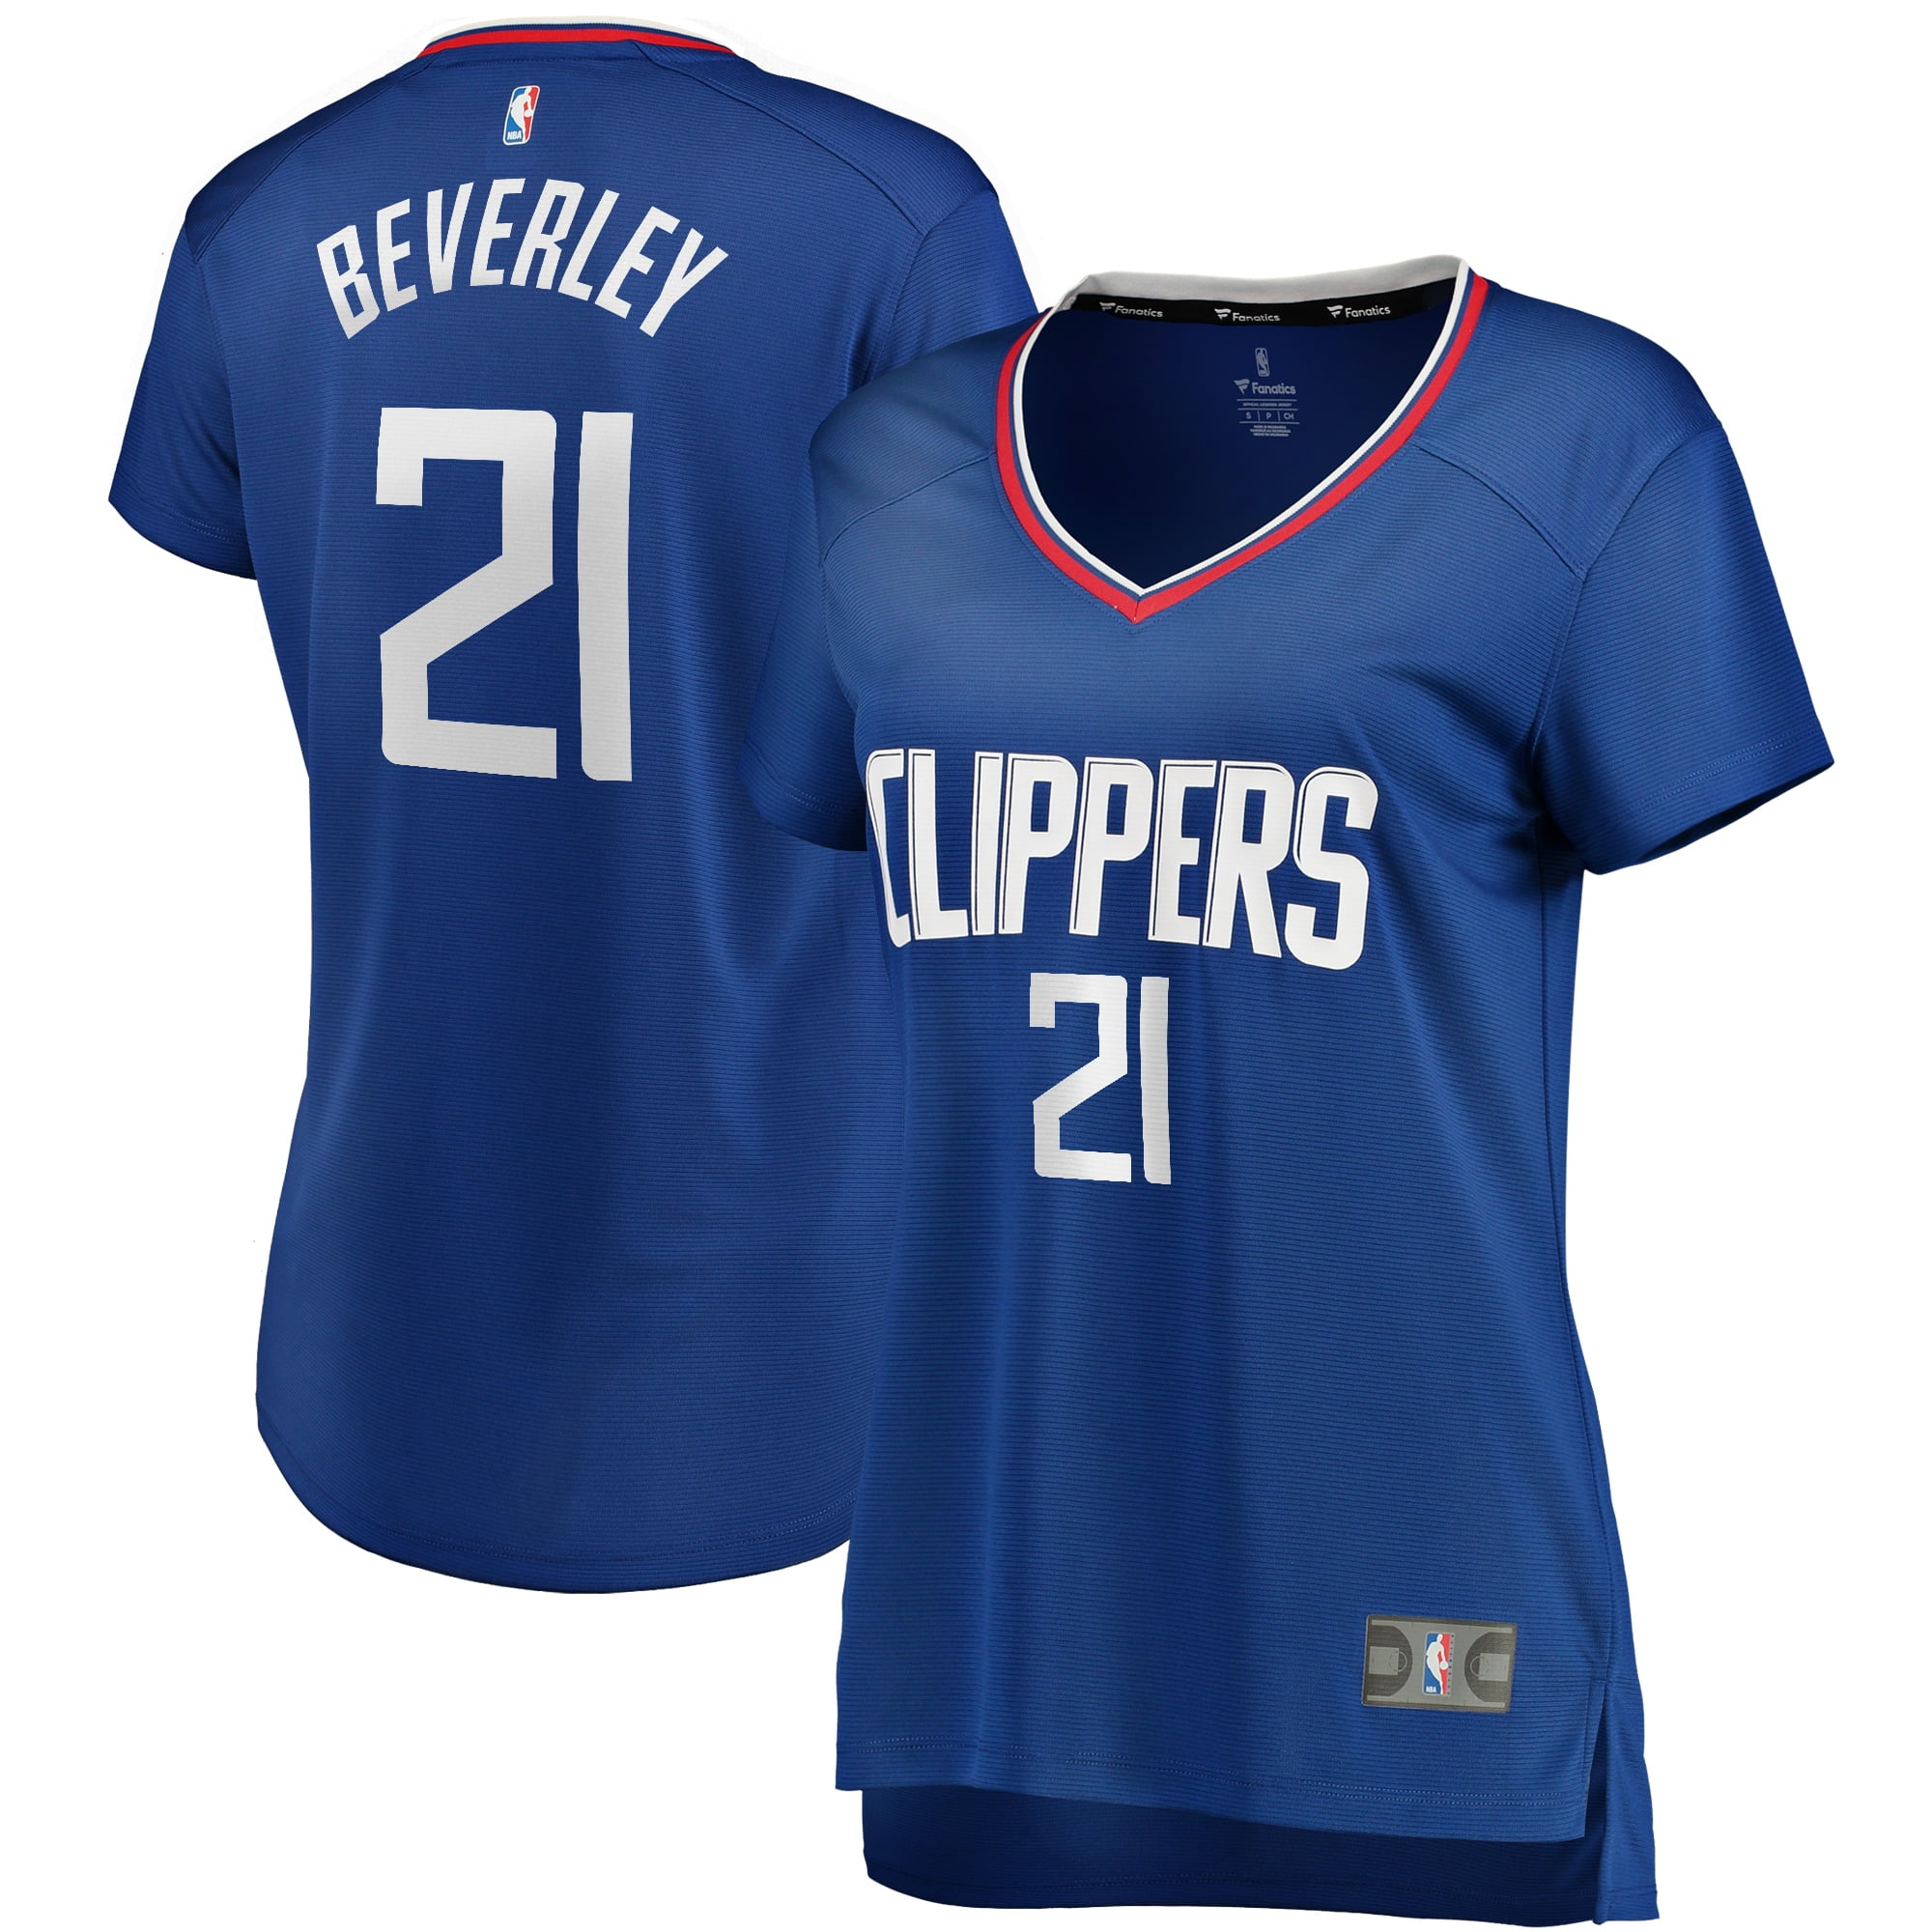 patrick beverley clippers jersey